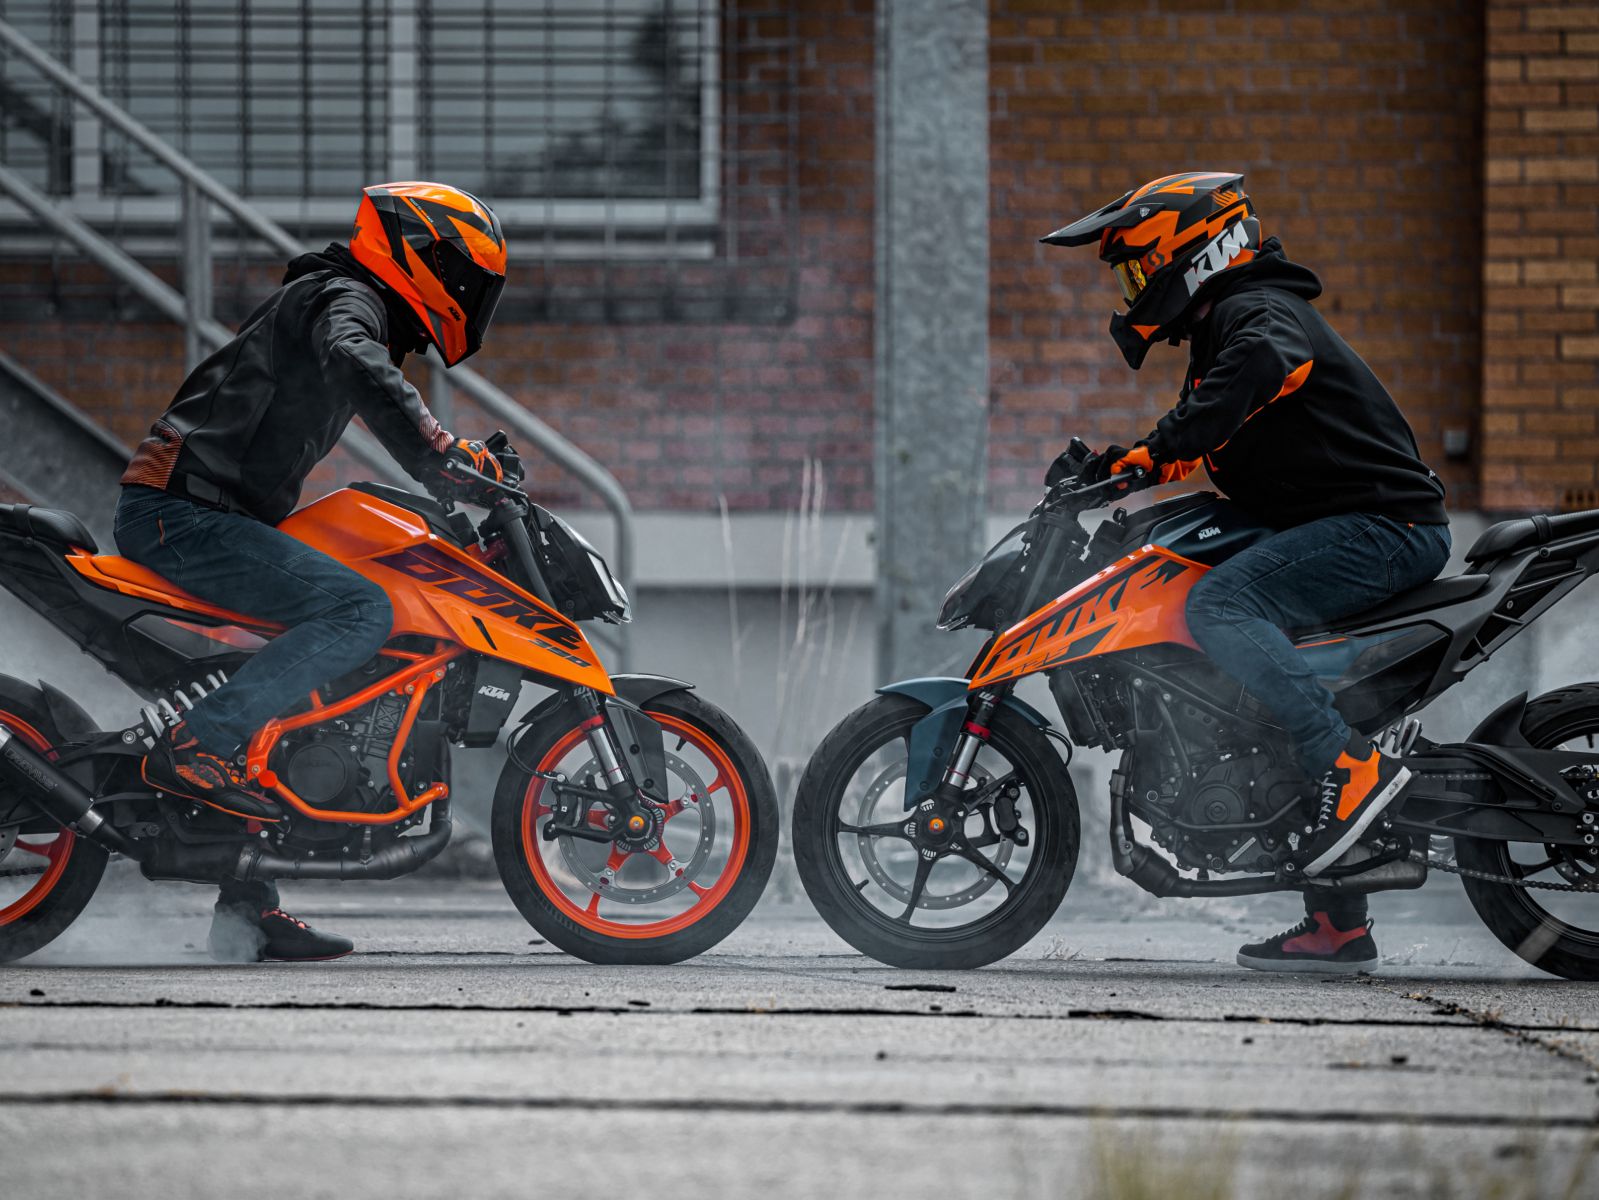 Duke 125: Bookings for India's cheapest KTM now open